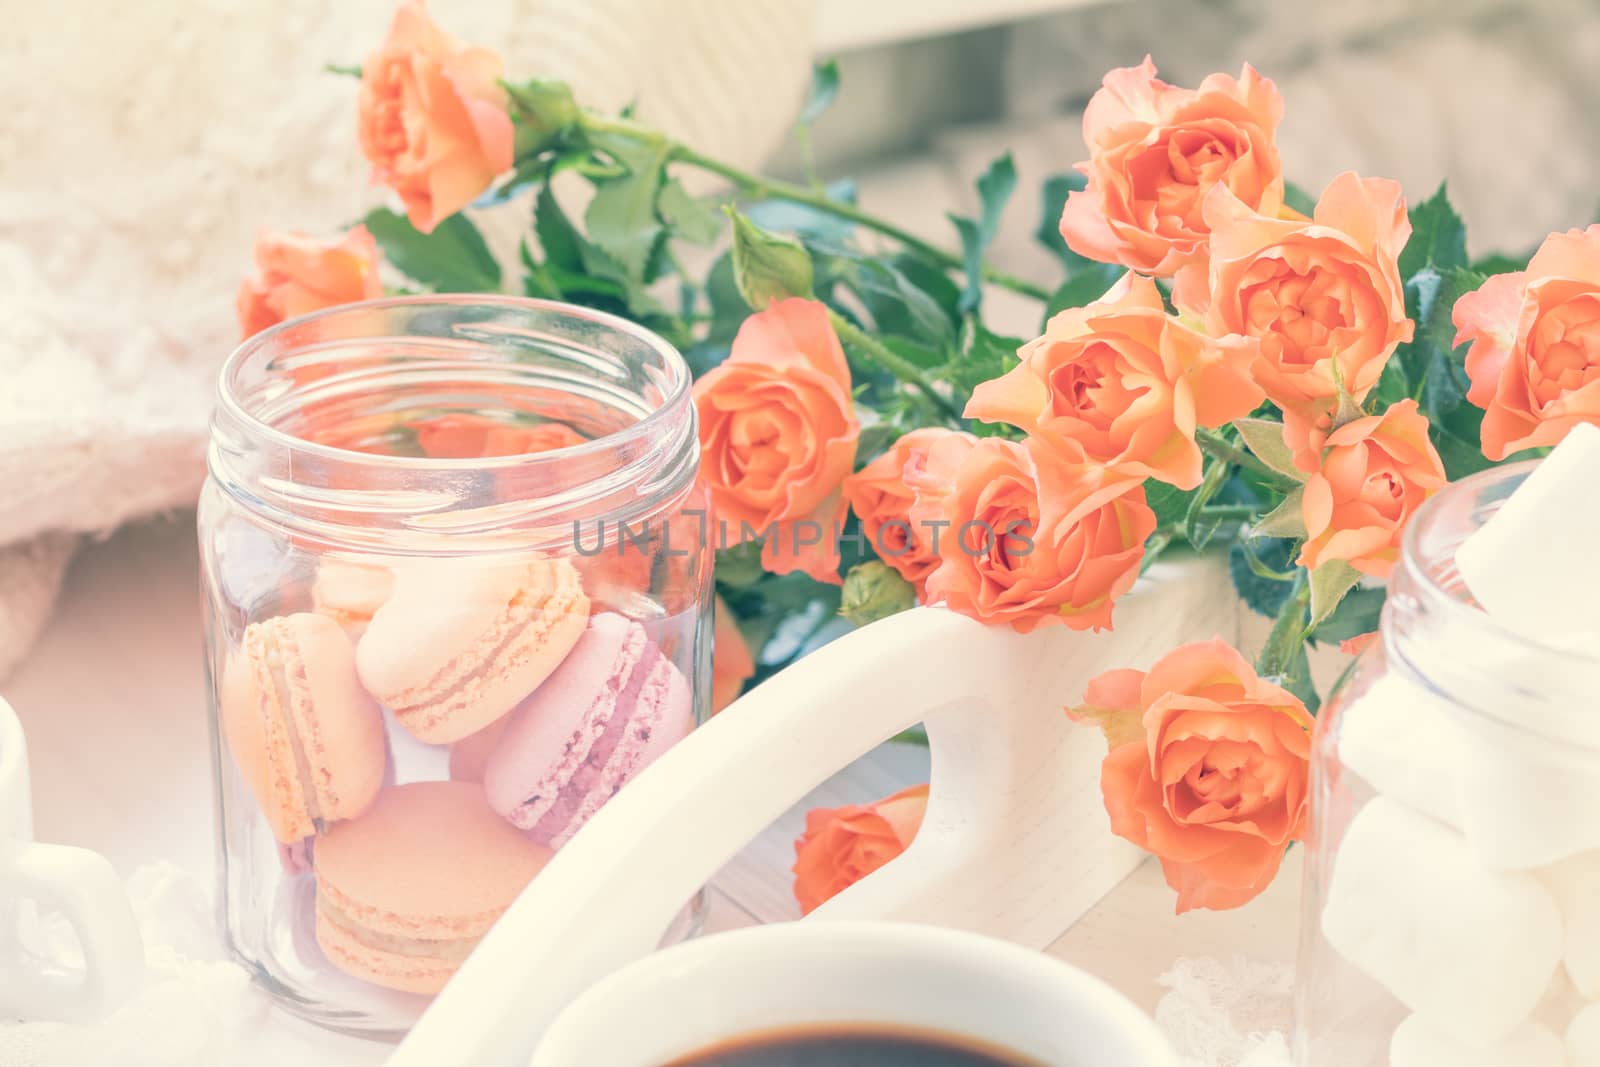 Cup of coffee. Orange mango or citrous macaroons and marshmallow in jars. Fresh little roses. Light wooden background. Sunlight. Toned photo with light vintage style. Shallow depth of field.